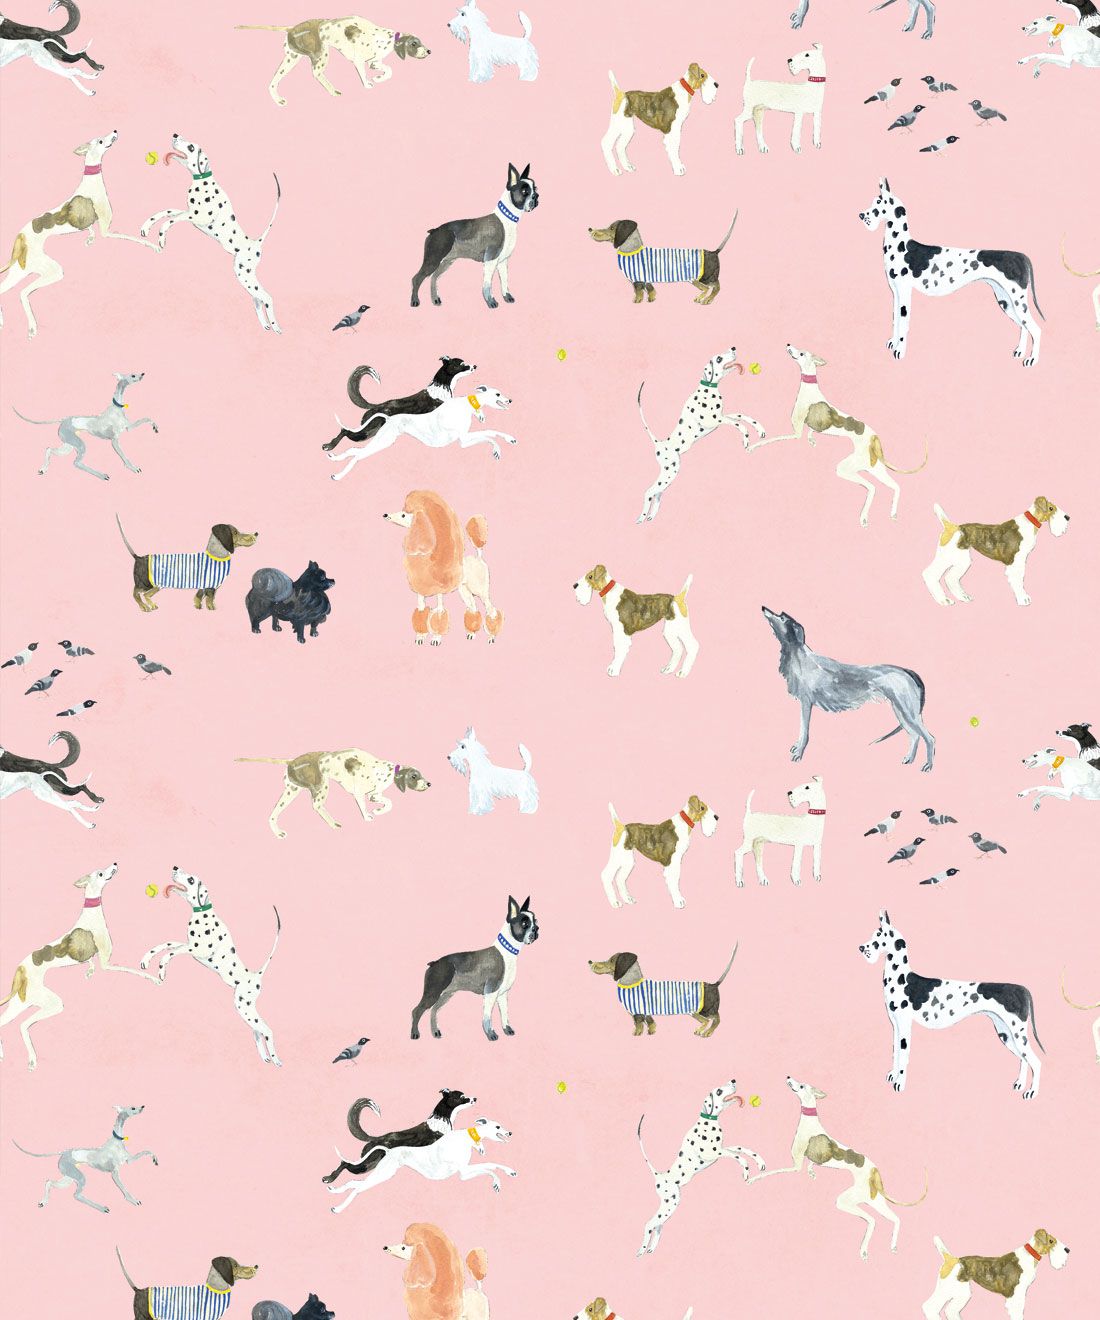 Pink Puppy Wallpapers - Wallpaper Cave